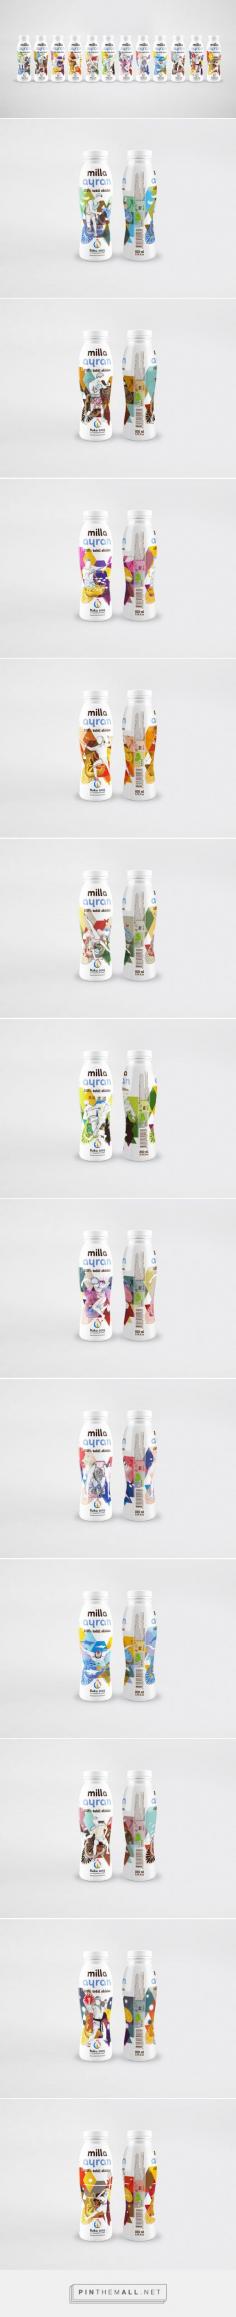 
                    
                        Milla Ayran limited edition packaging for European Games Baku 2015  via Packaging of the World curated by Packaging Diva PD. More really nice packaging illustrations.
                    
                